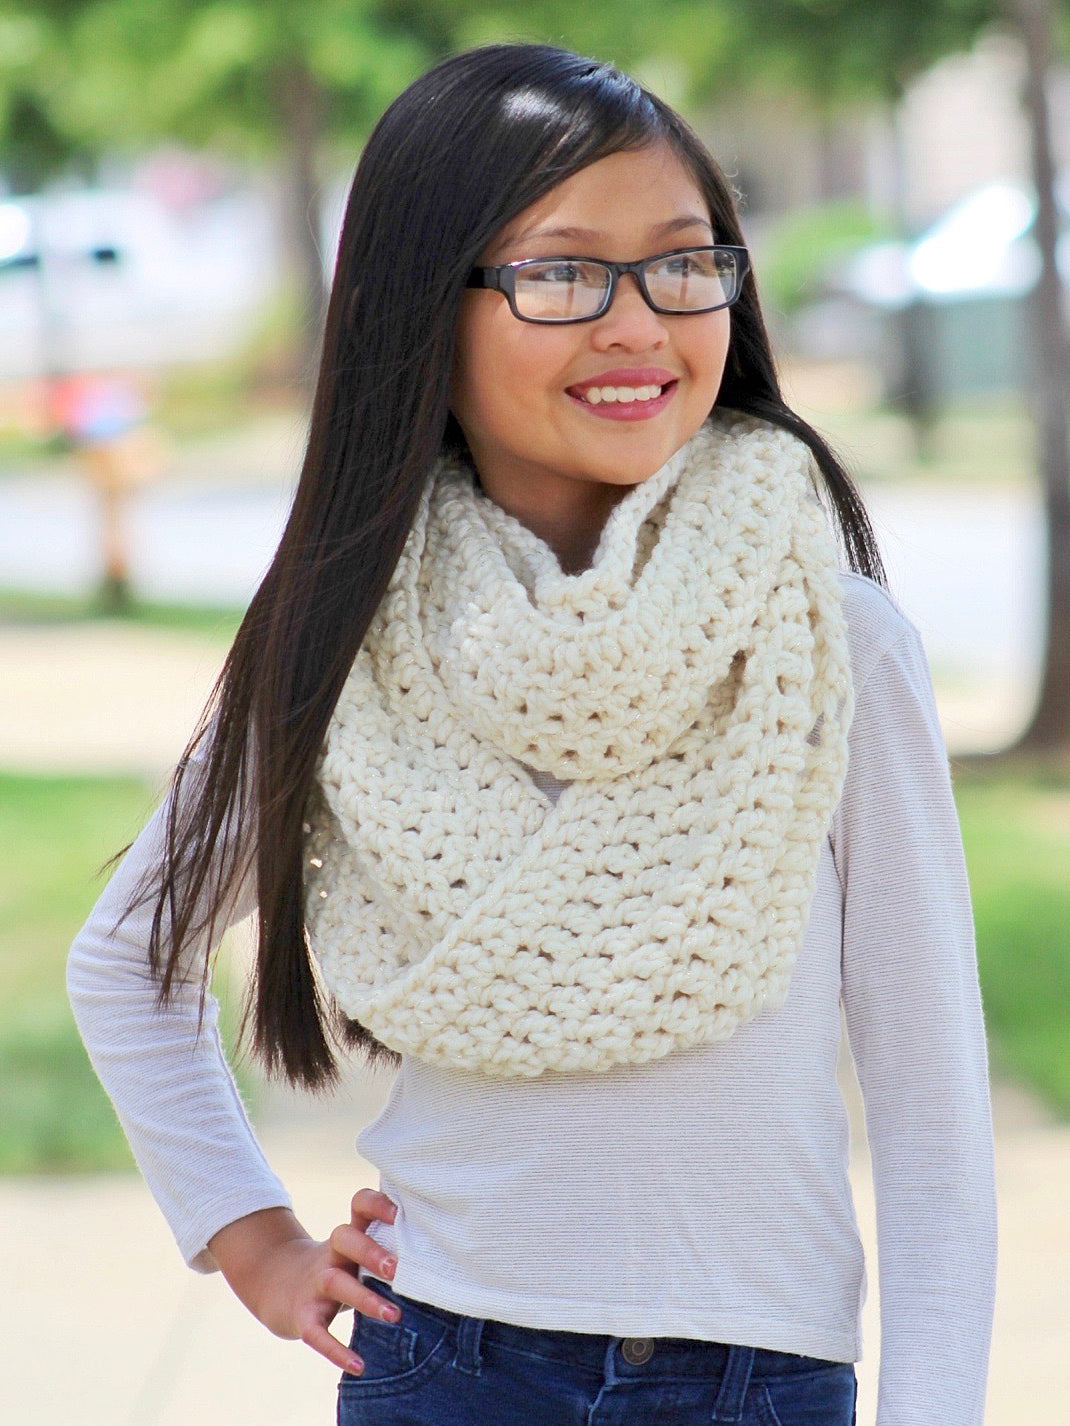 Cream sparkle infinity cowl winter scarf by Two Seaside Babes